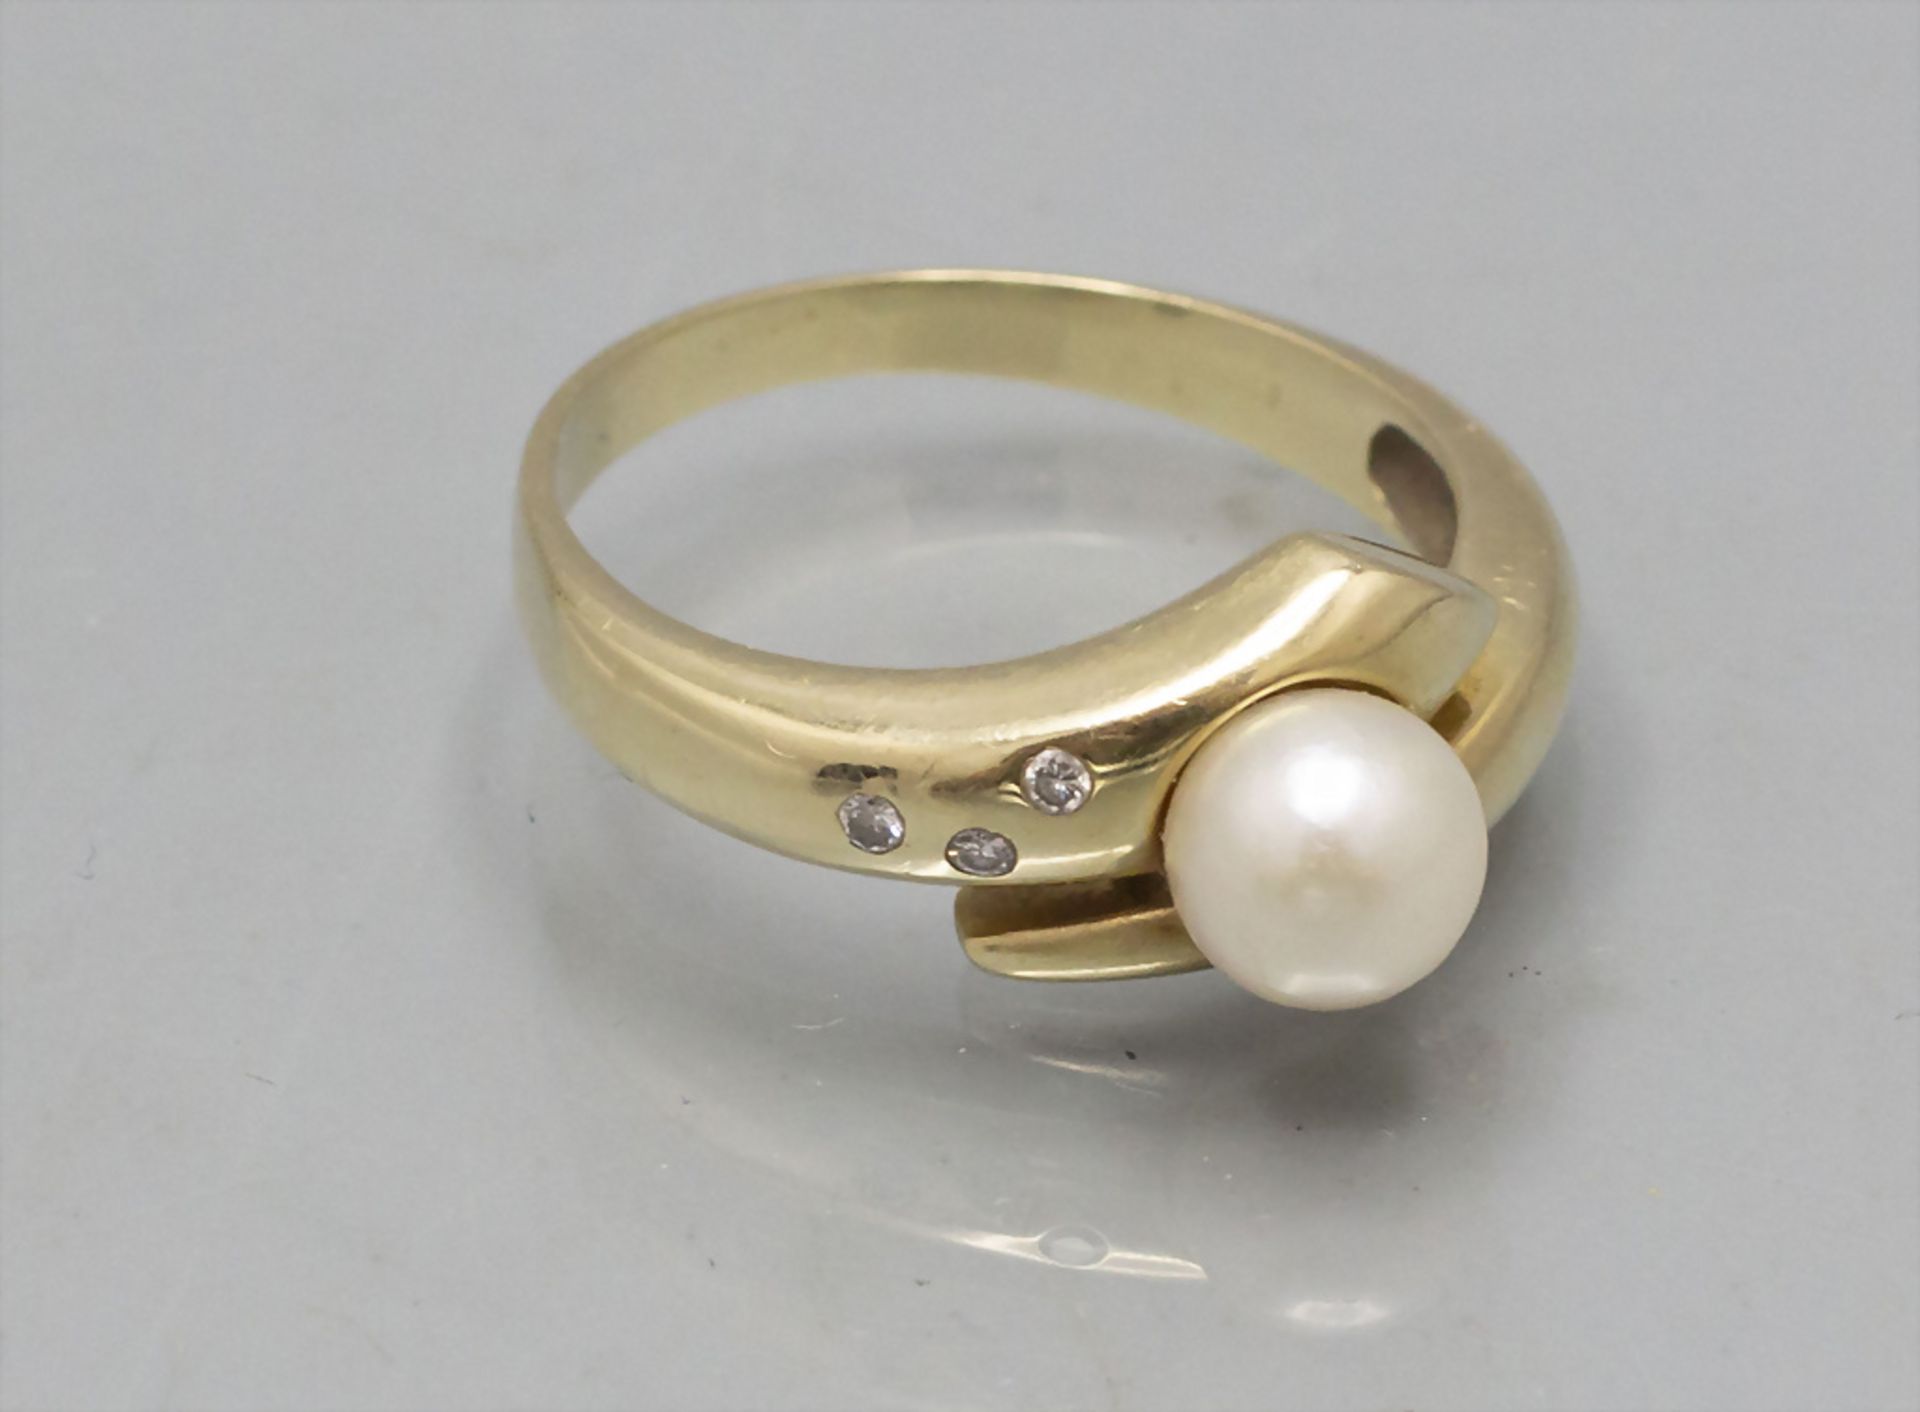 Damenring mit Perle und Diamanten / A ladies 8 ct gold ring with a pearl and diamonds